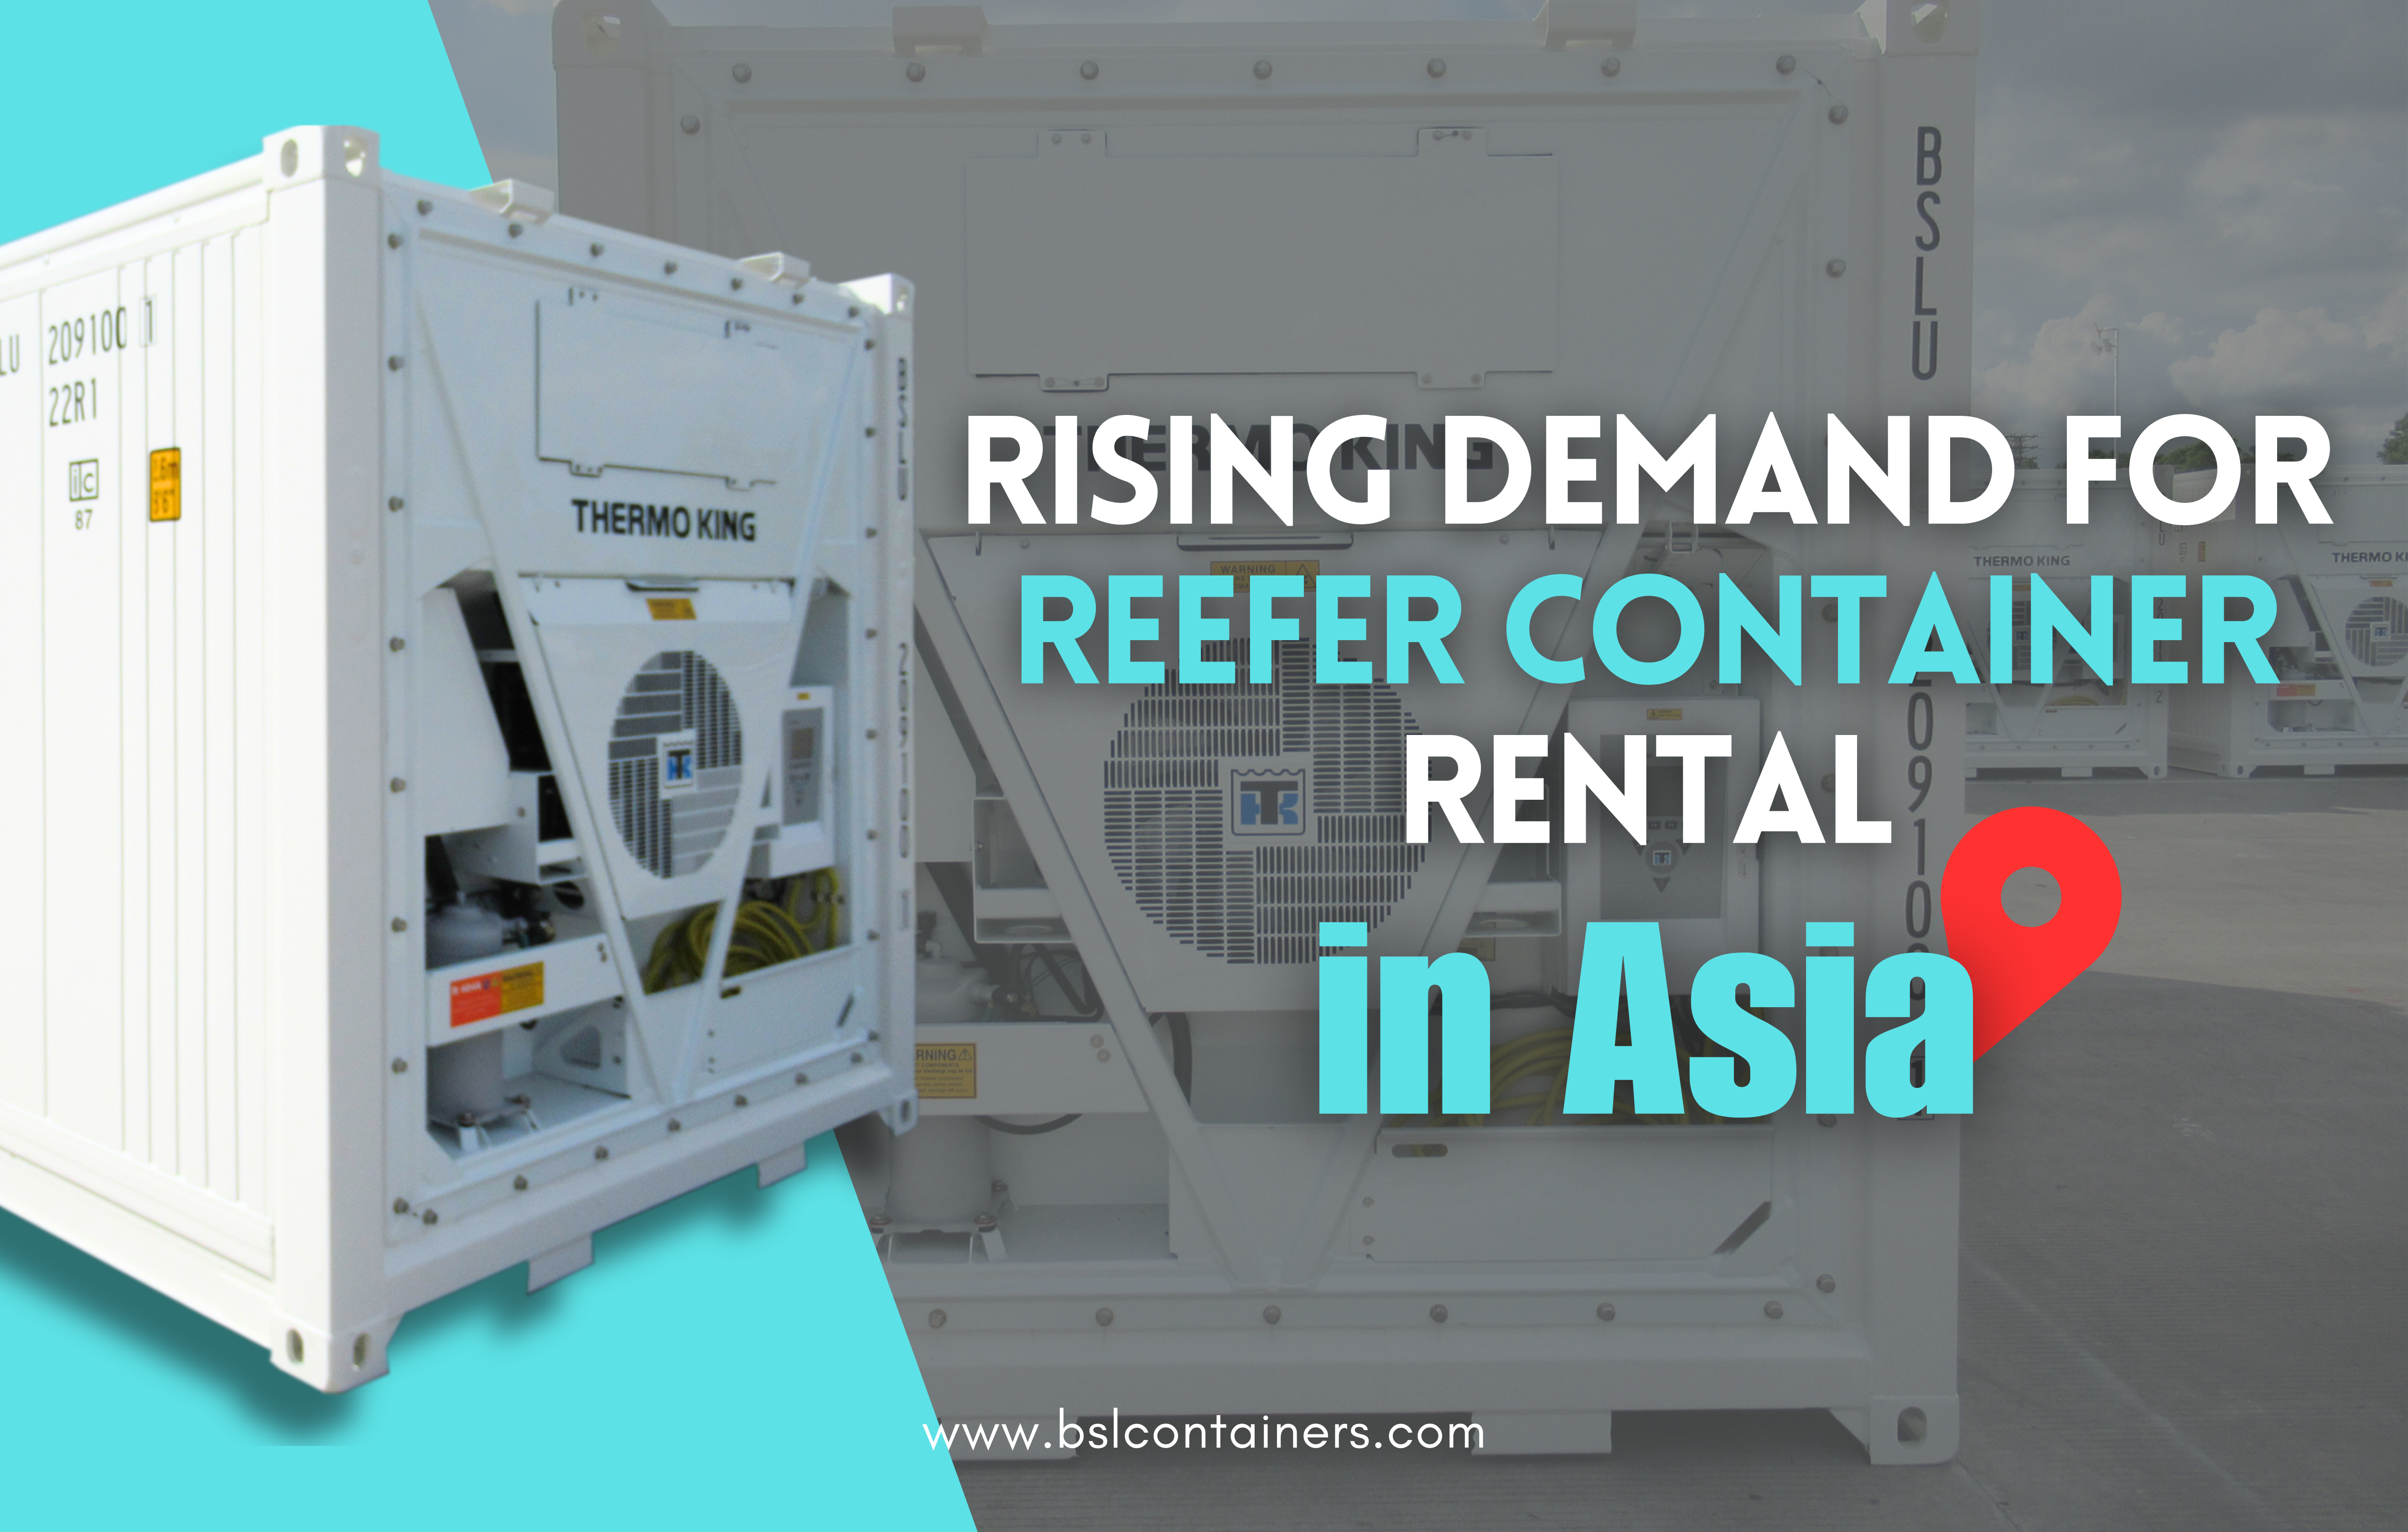 THE RISING DEMAND FOR THE REEFER CONTAINER RENTAL IN ASIA